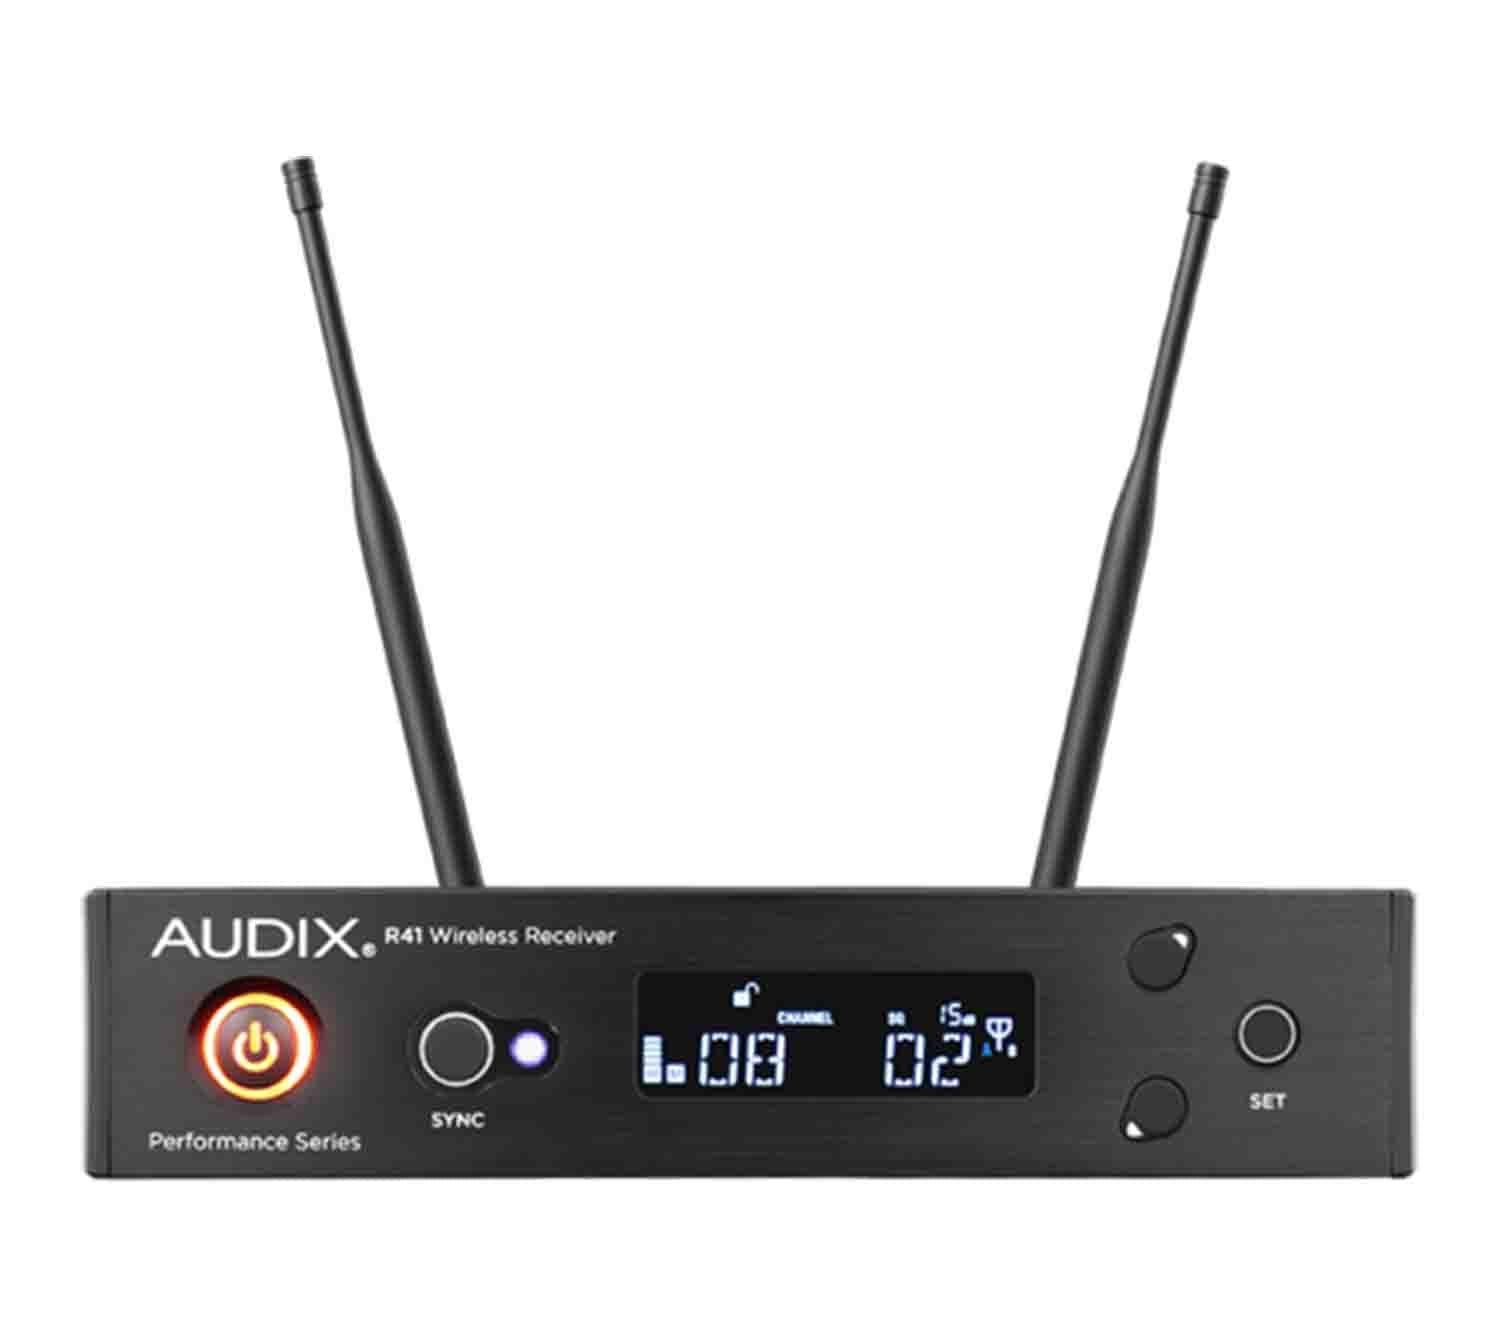 Audix AP41 OM5, Wireless Handheld Microphone System - 554 to 586 MHz - Hollywood DJ